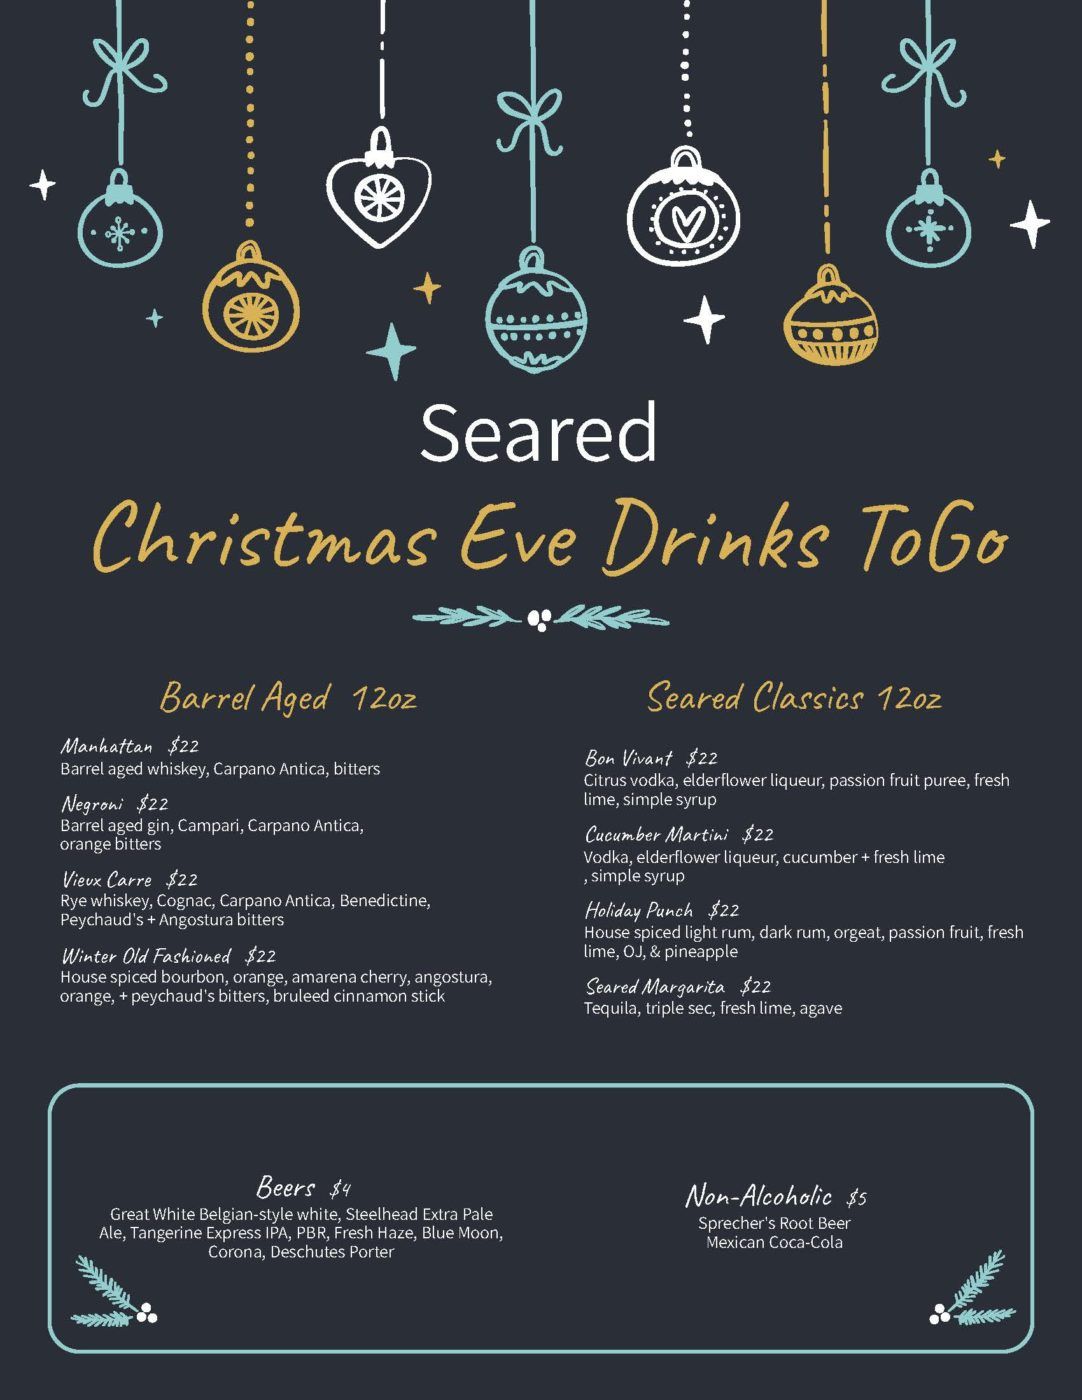 Christmas Eve Drinks and Cocktails to-go from Seared 